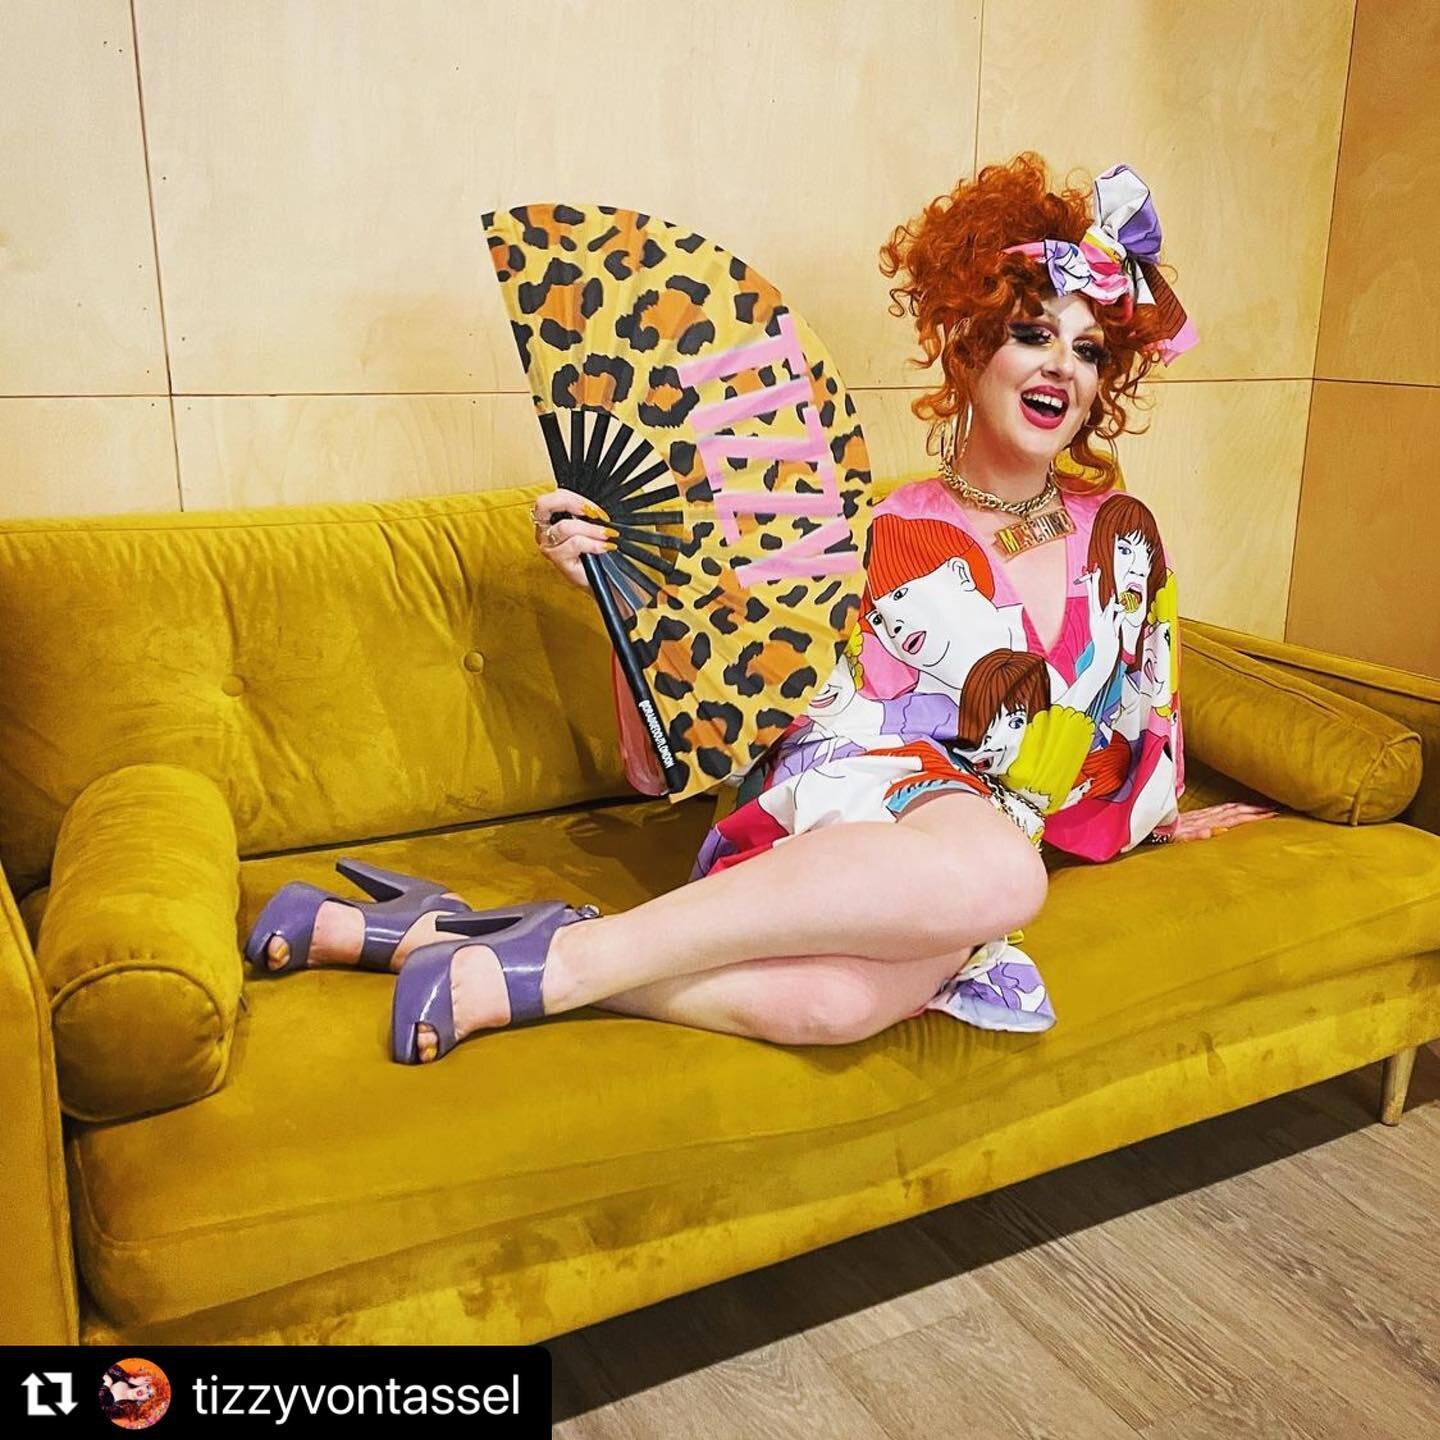 Tizzy&rsquo;s biggest fans are in Reading!🥂 
🎟 Party Party Bingo
🗓 TONIGHT! Wed 17th Sept
📍  @rdgbiscuitfactory 
💵 &pound;10
🎤 @tizzyvontassel 
.
.
#bingo #dragbingo #drag #wemakeevents #femaleownedbusiness #partystarters #party #goodtimegals